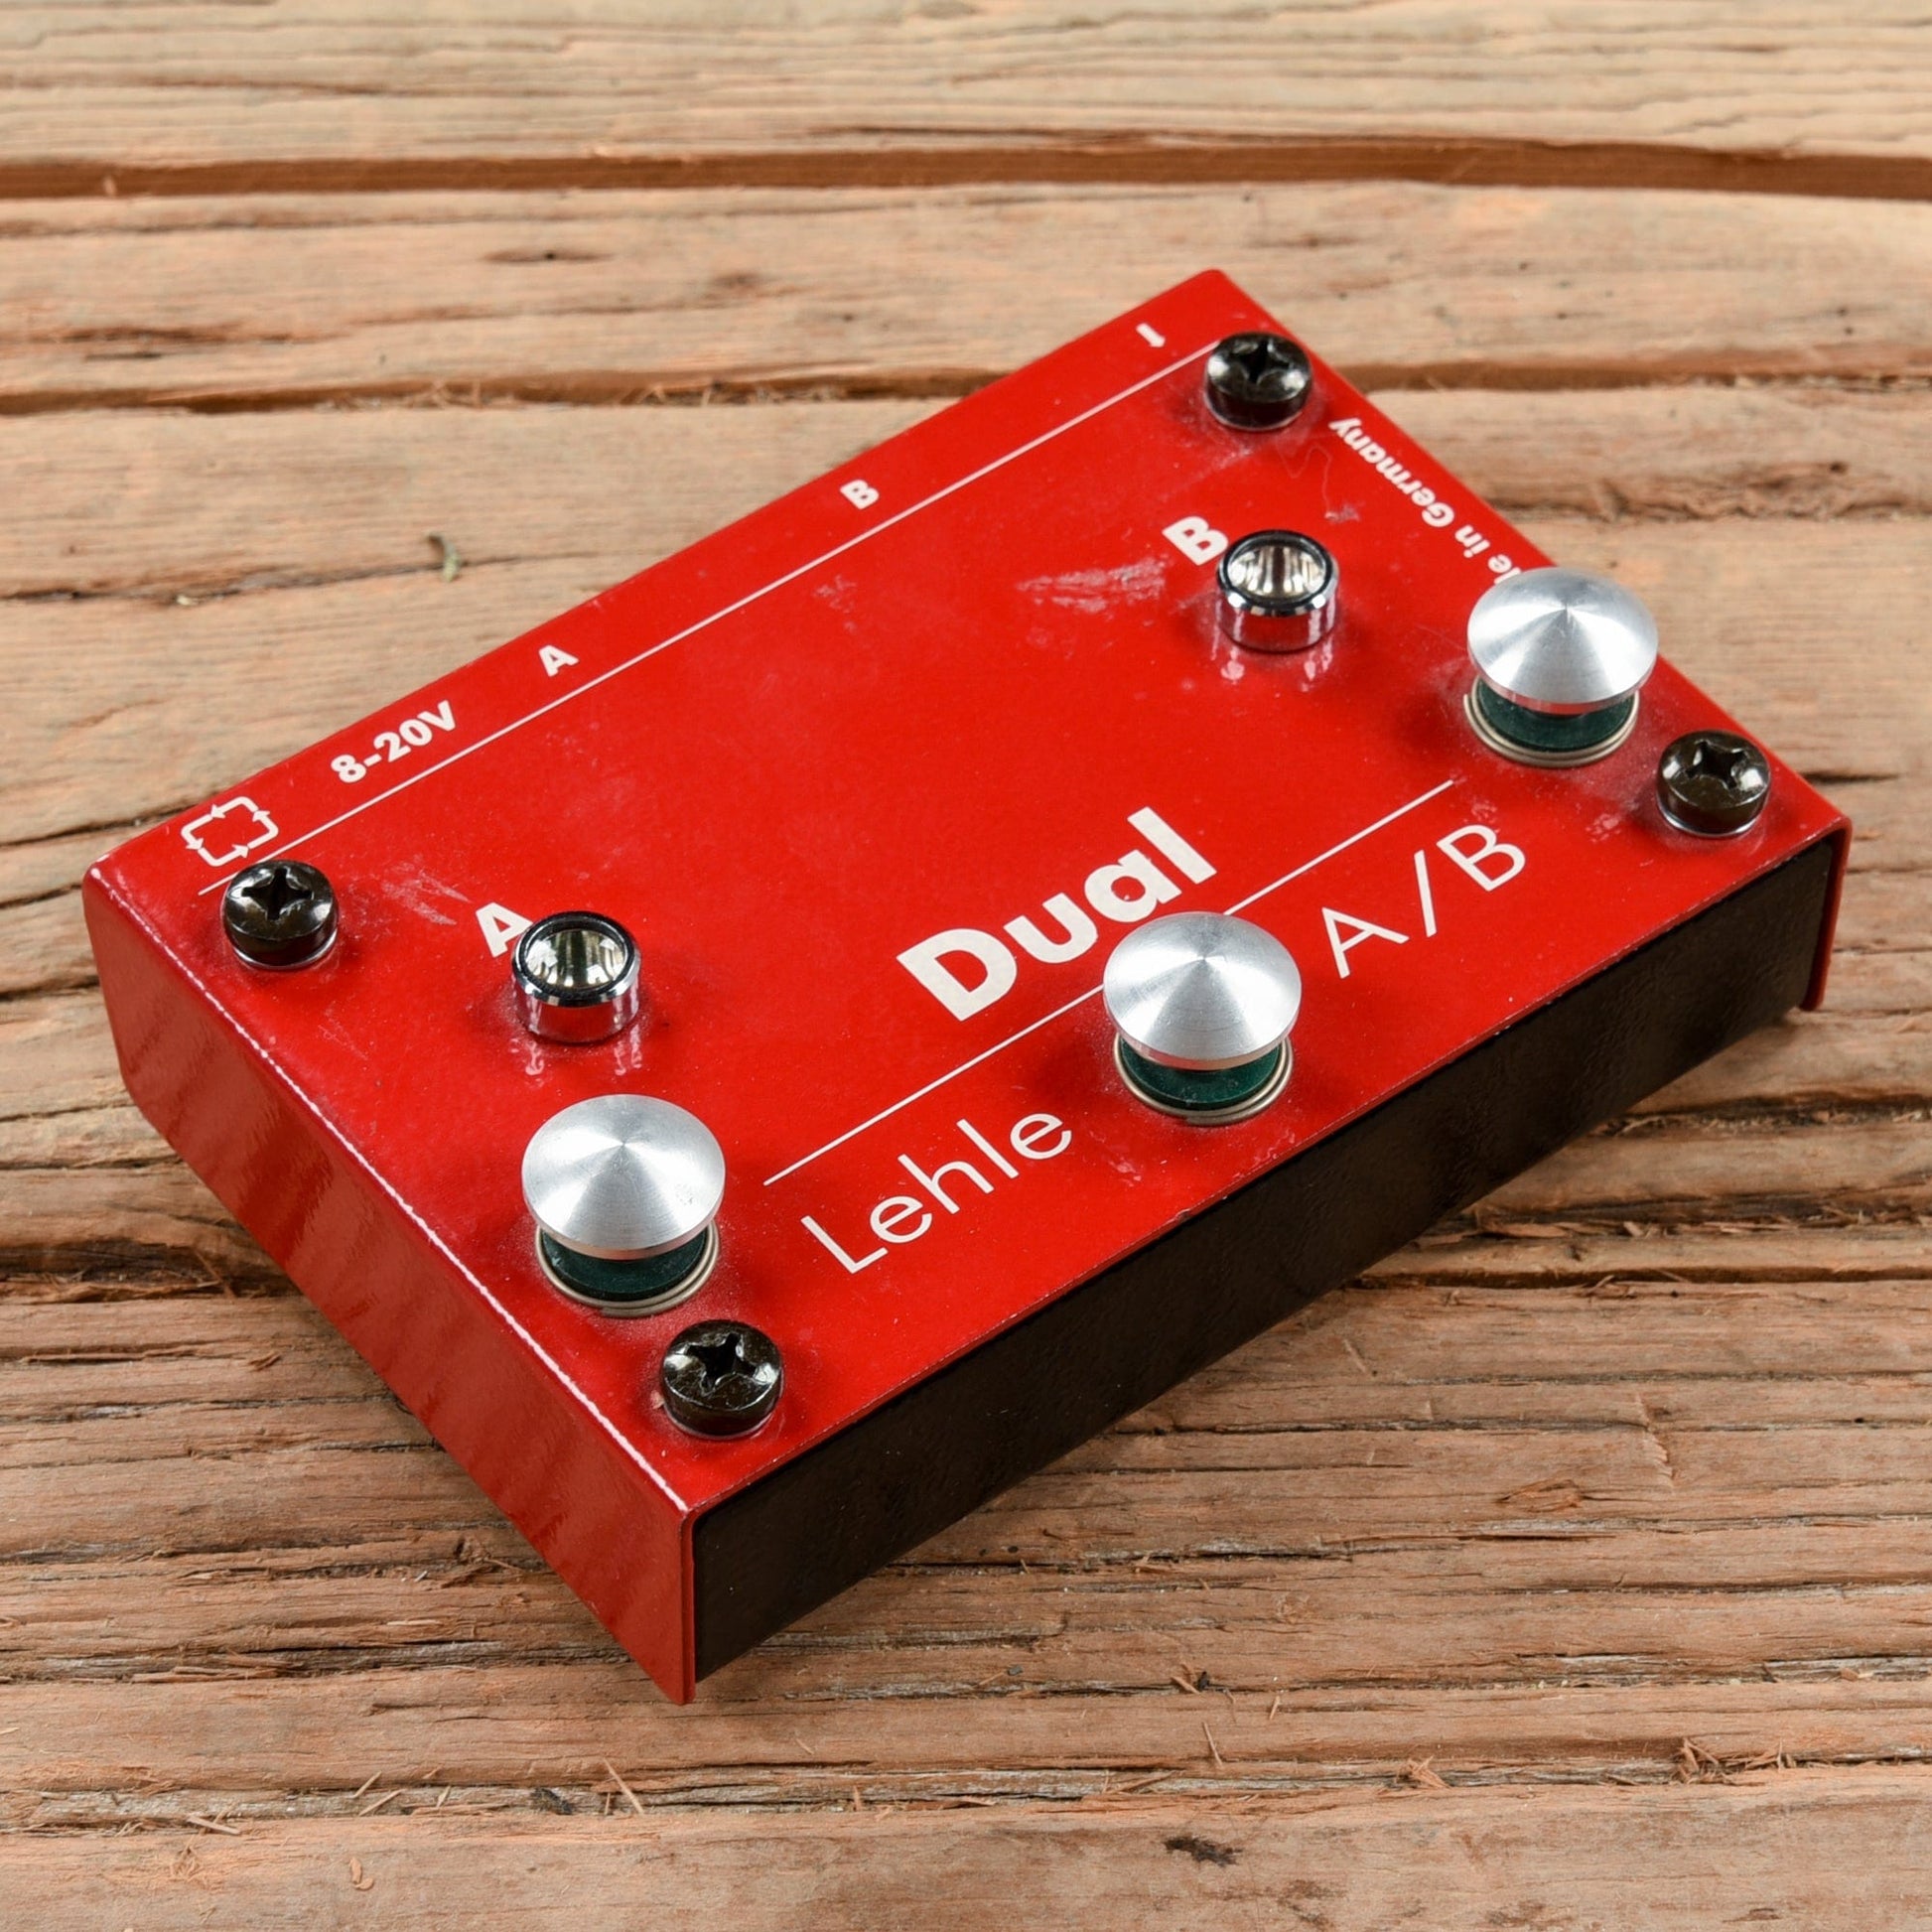 Lehle Dual Amp Switcher Effects and Pedals / Controllers, Volume and Expression